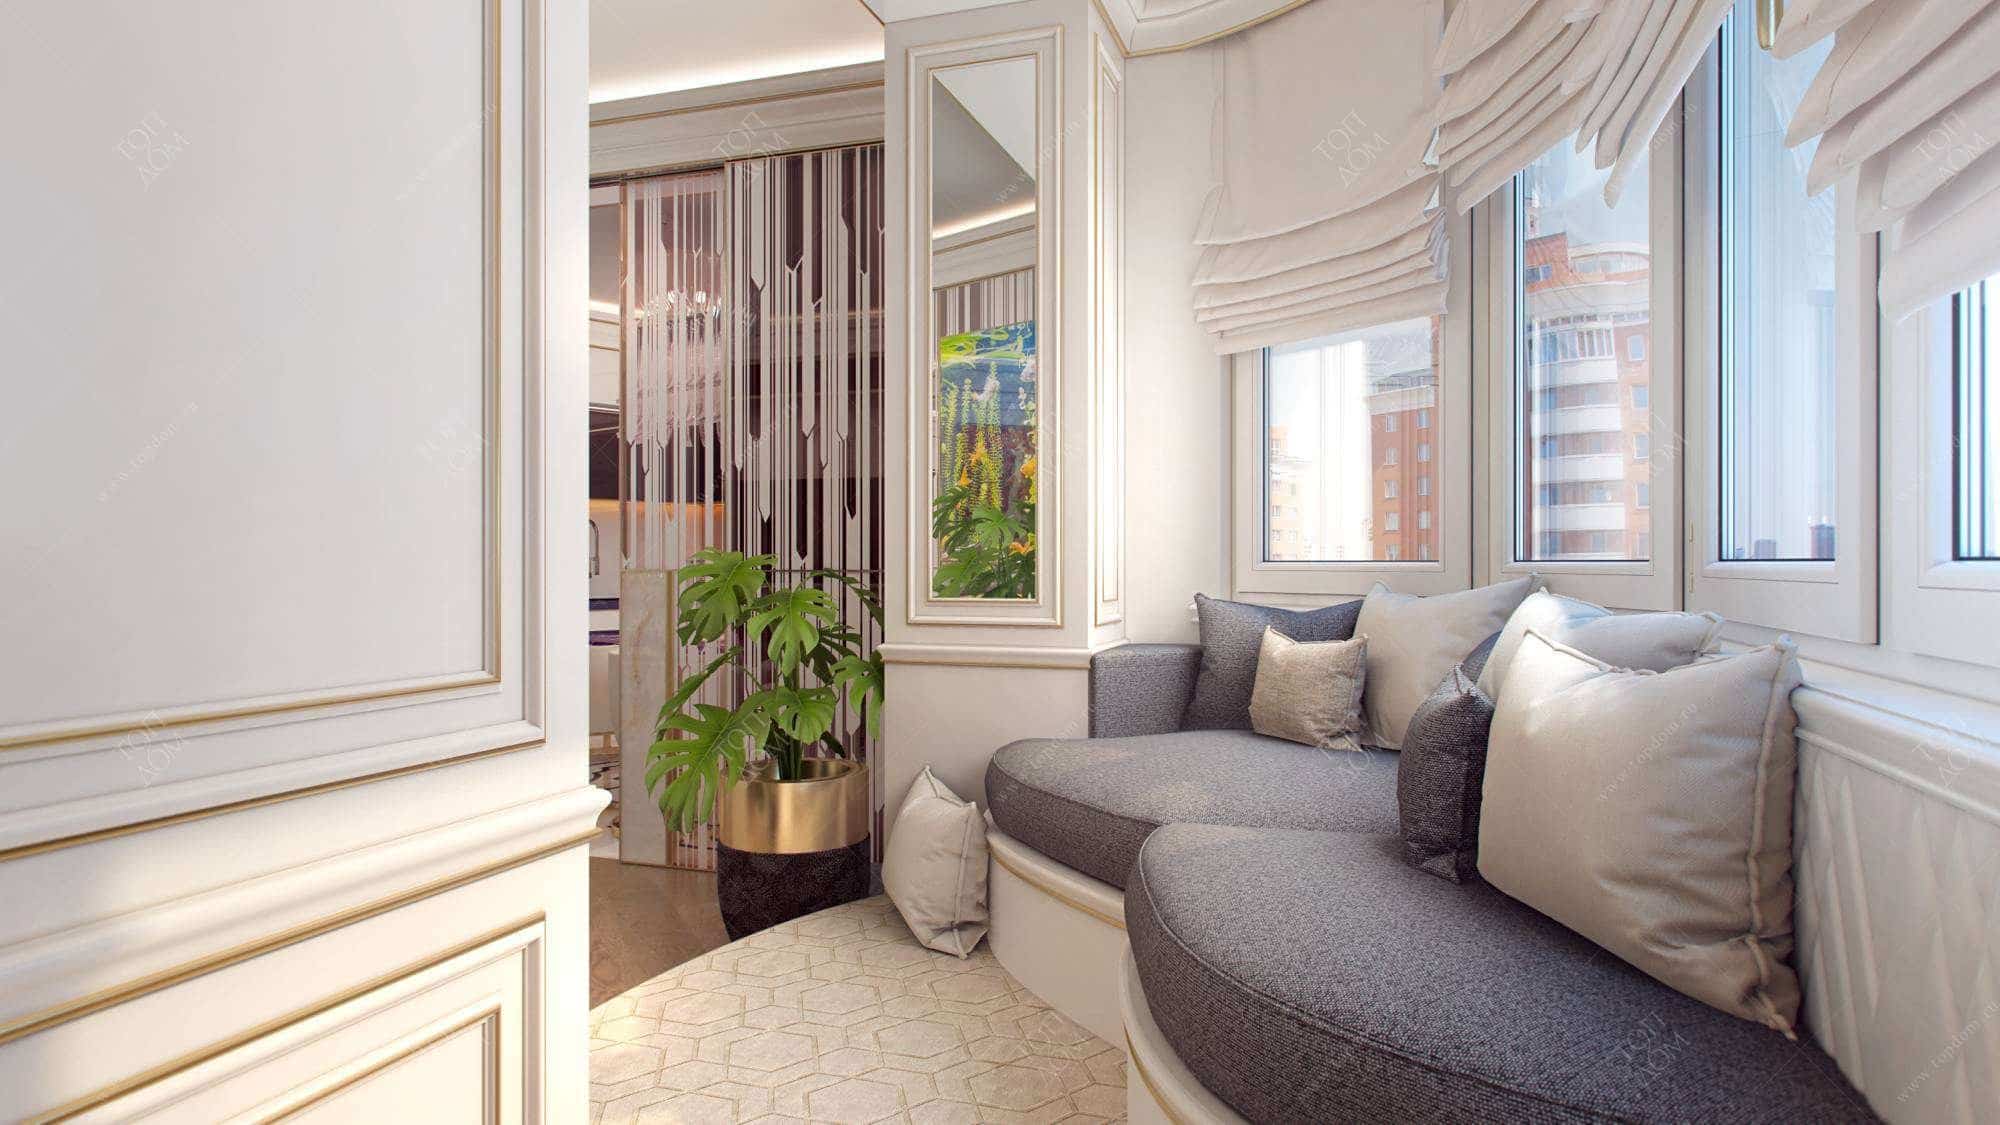 Loggia Combined with other Rooms: Best Zoning Options. Wavy furniture design in classical interior